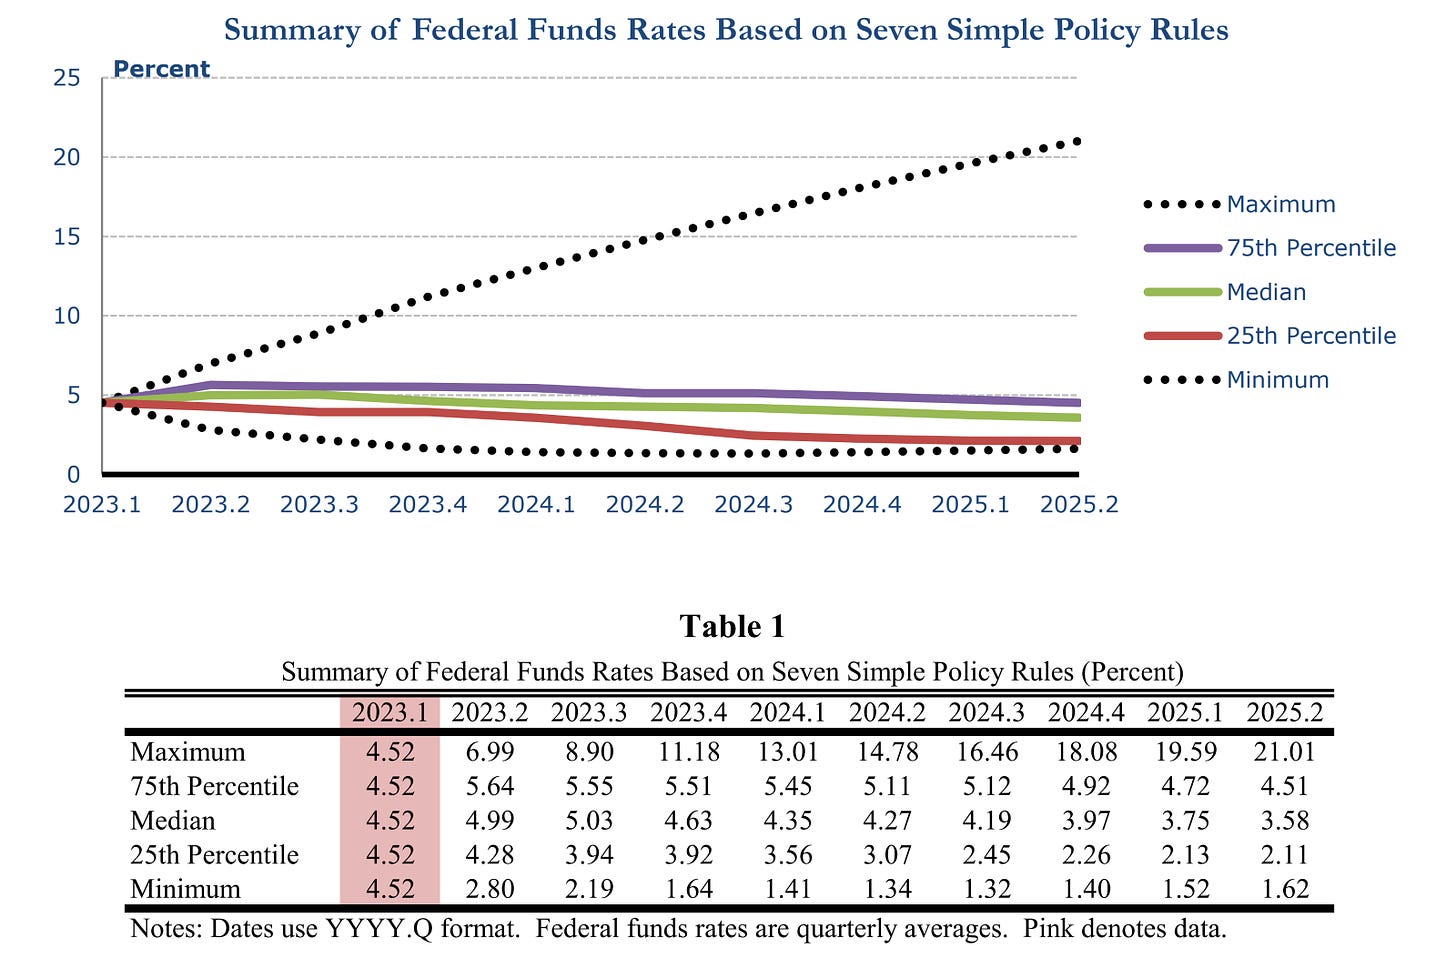 Notes: Dates use YYYY.Q format. Federal funds rates are quarterly averages. Pink denotes data.